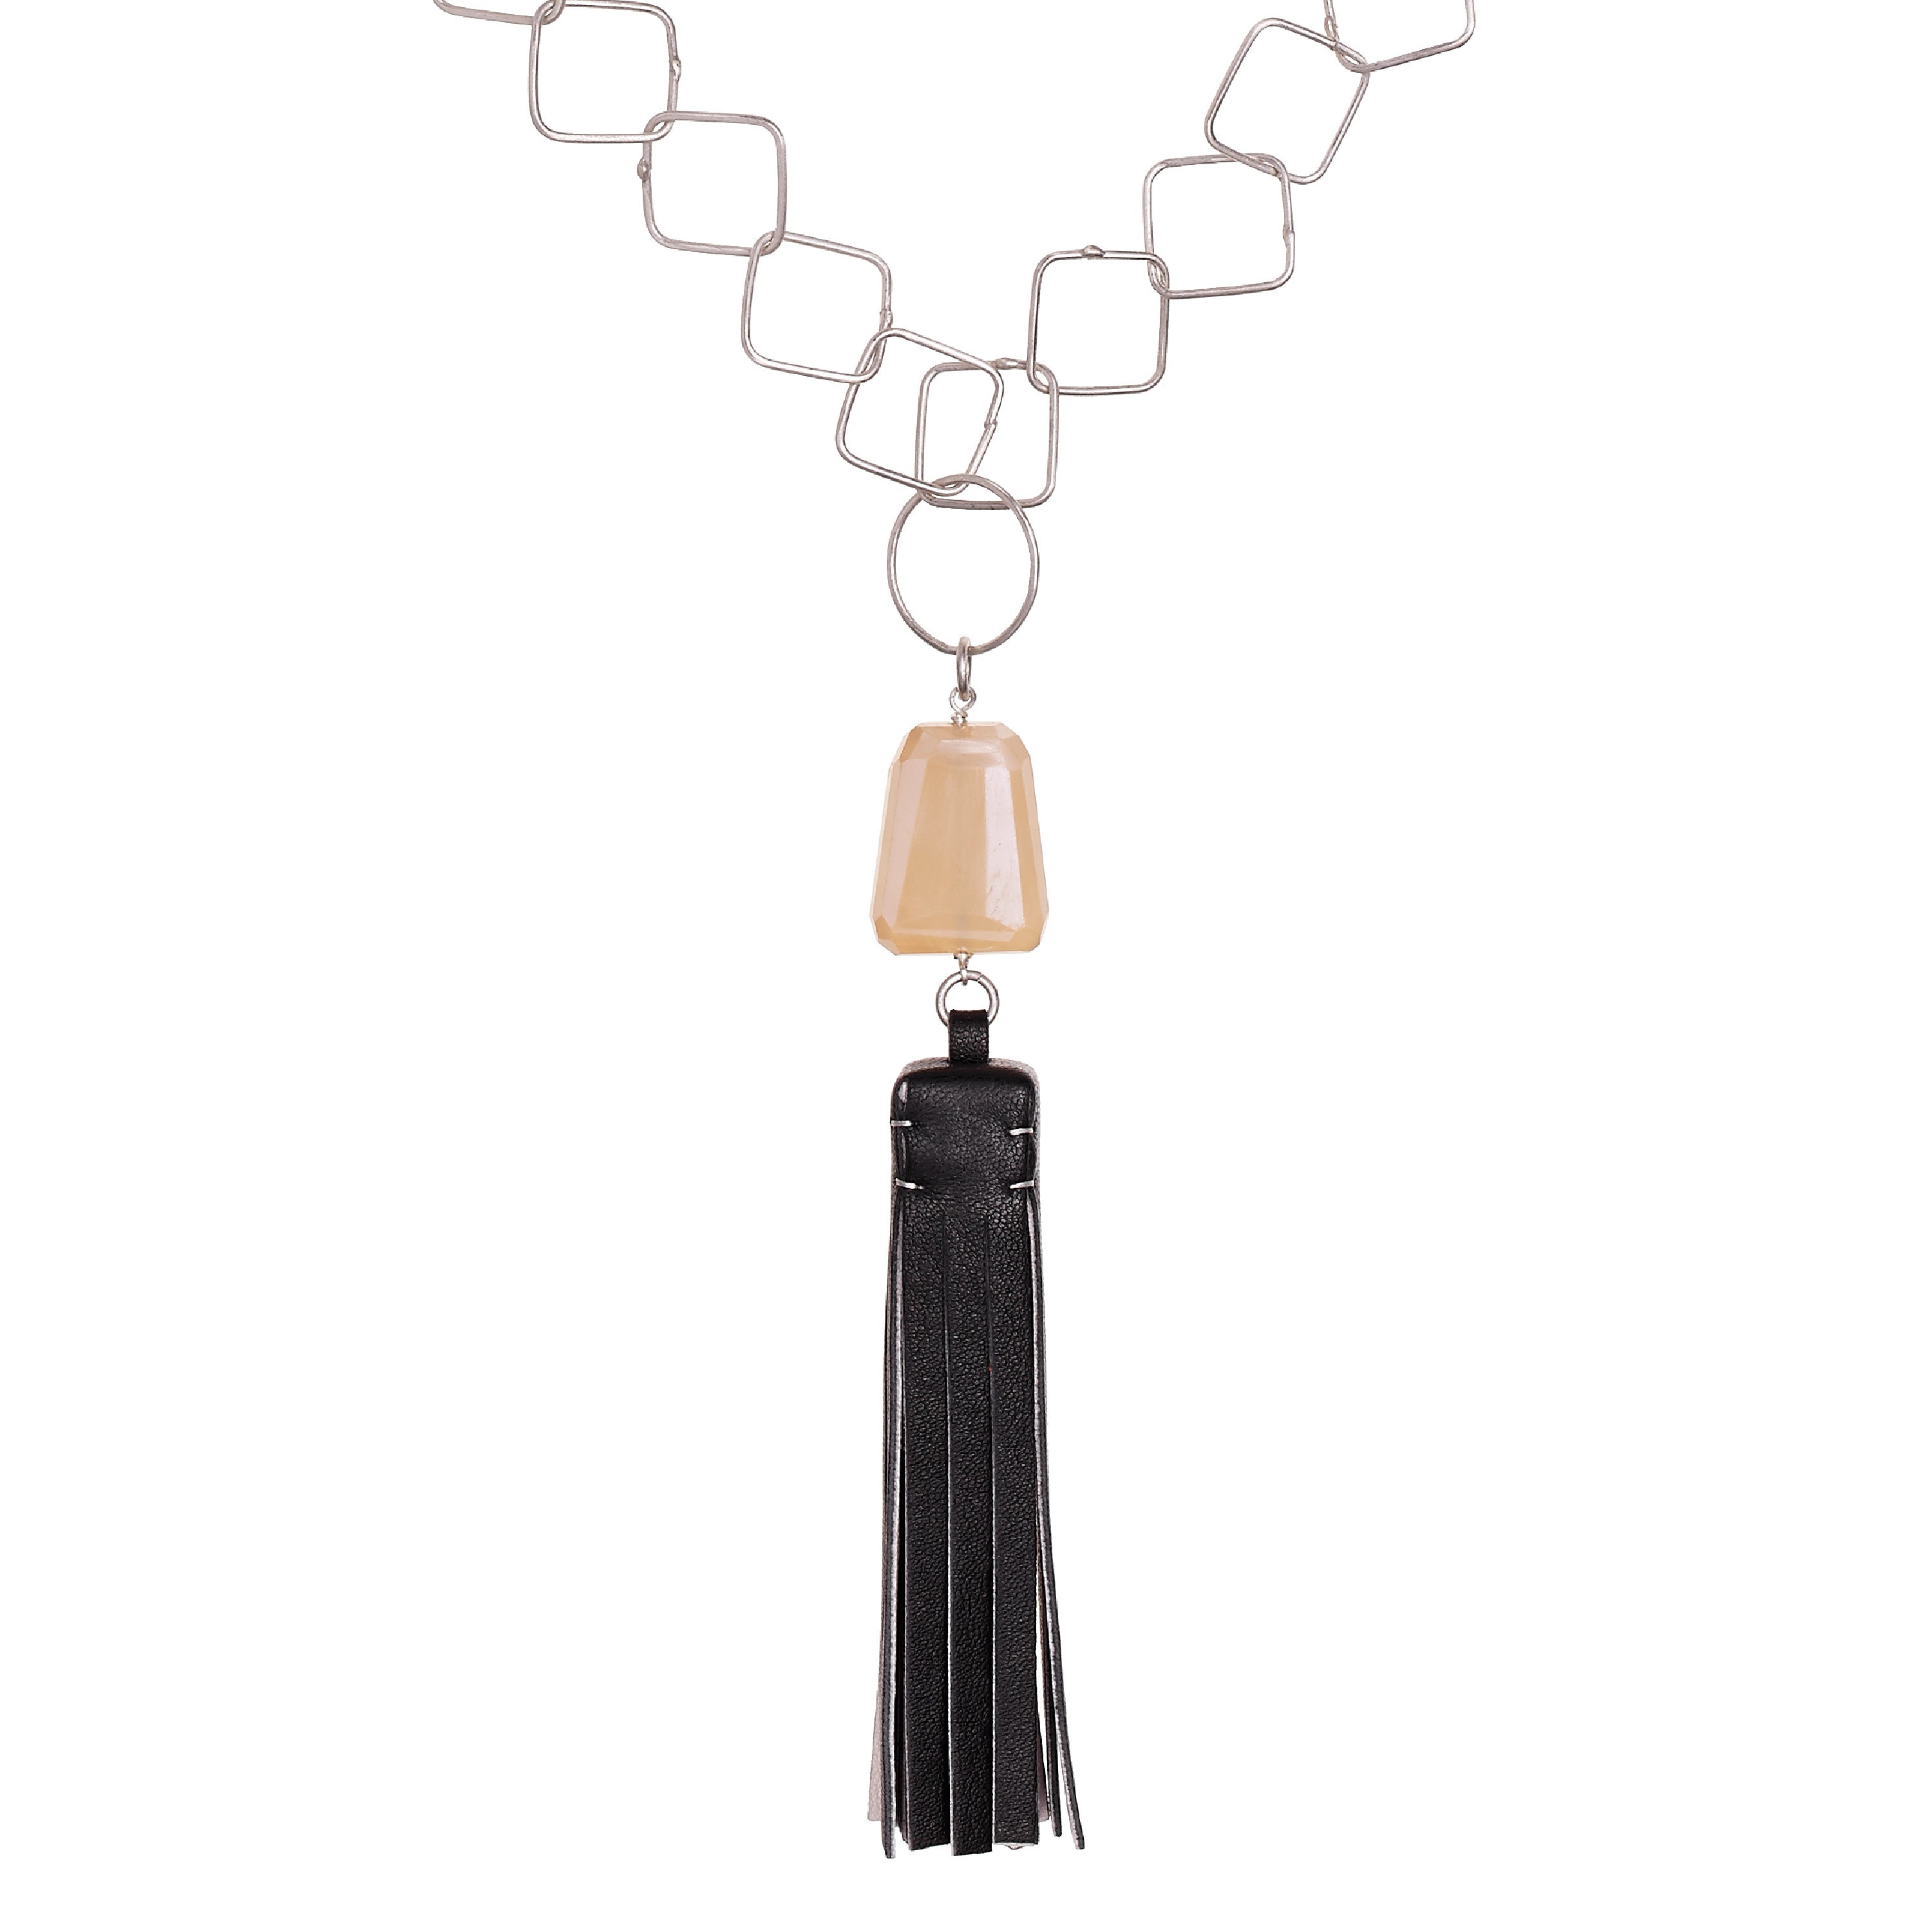 Tassel “Square” Necklace with Black & White Leather and Chalcedony